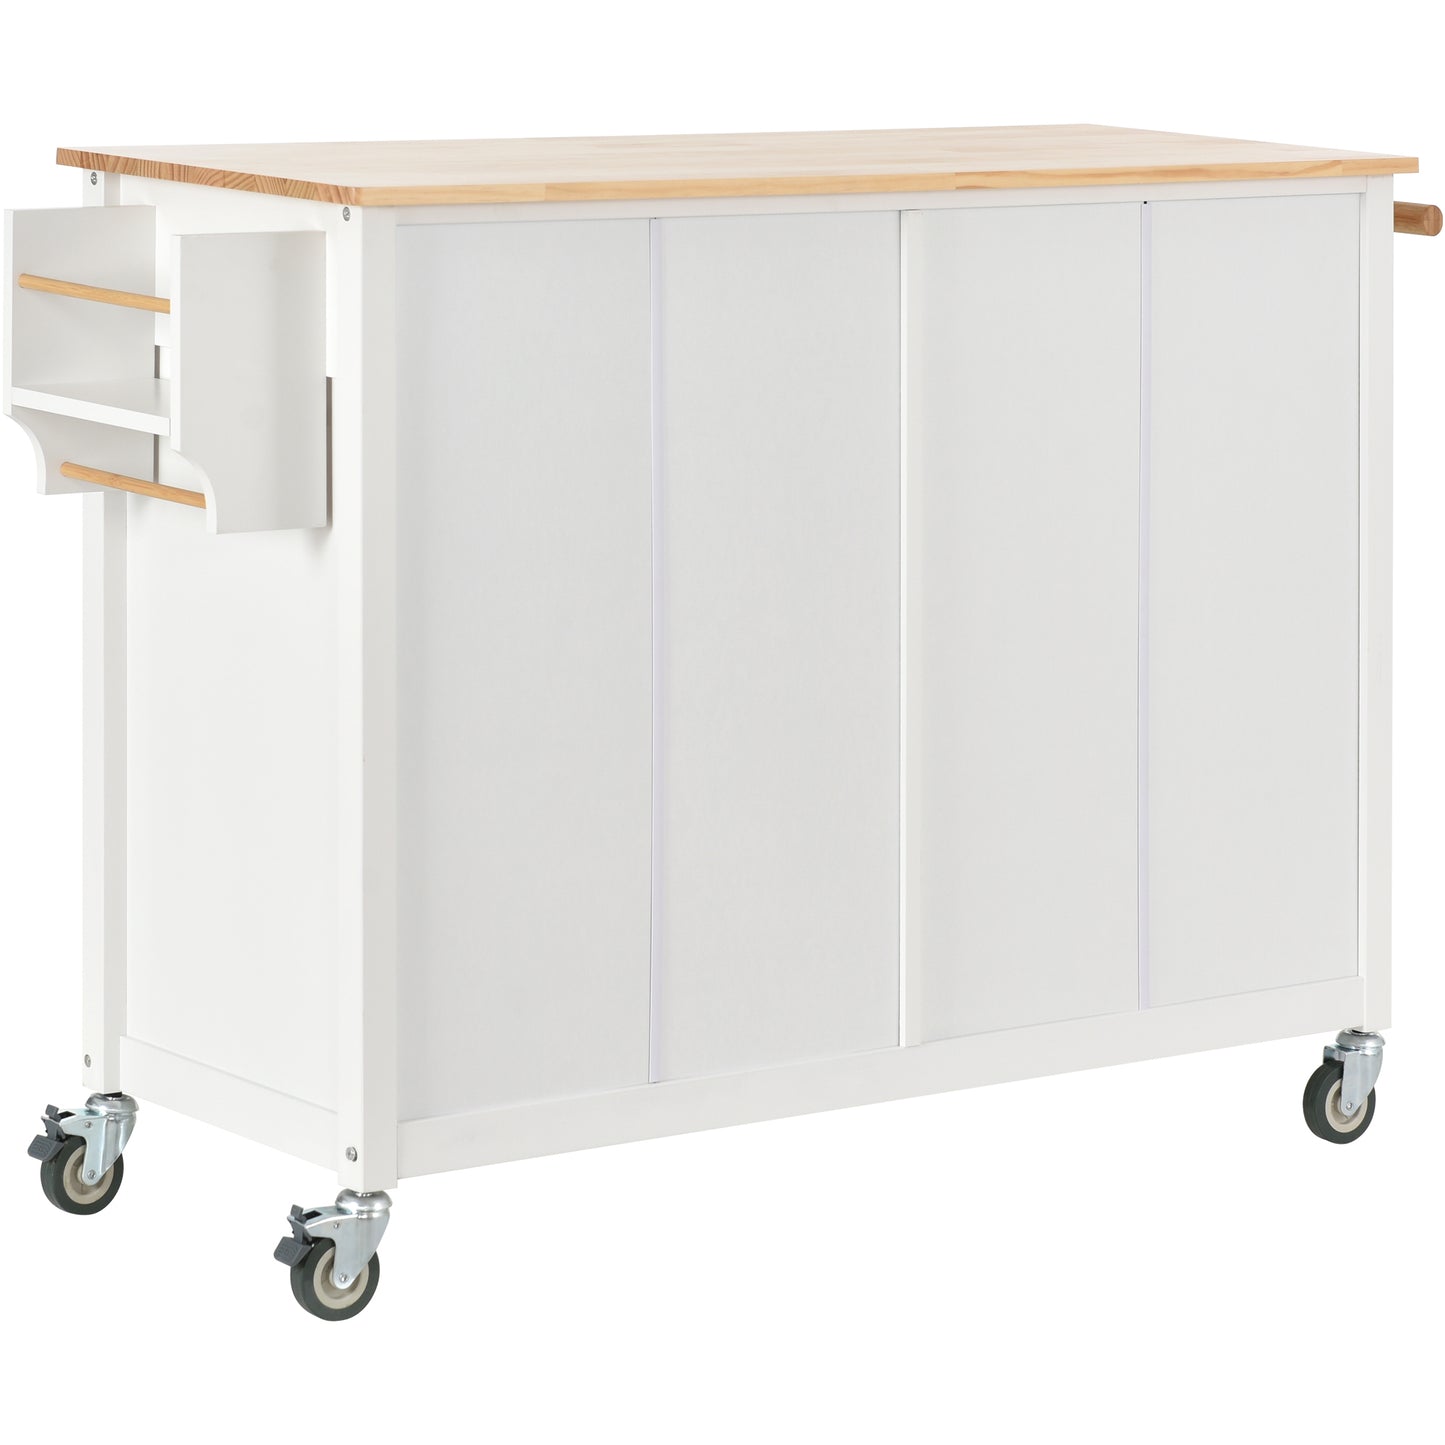 Kitchen Island Cart with Solid Wood Top and Locking Wheels,54.3 Inch Width,4 Door Cabinet and Two Drawers,Spice Rack, Towel Rack (White)